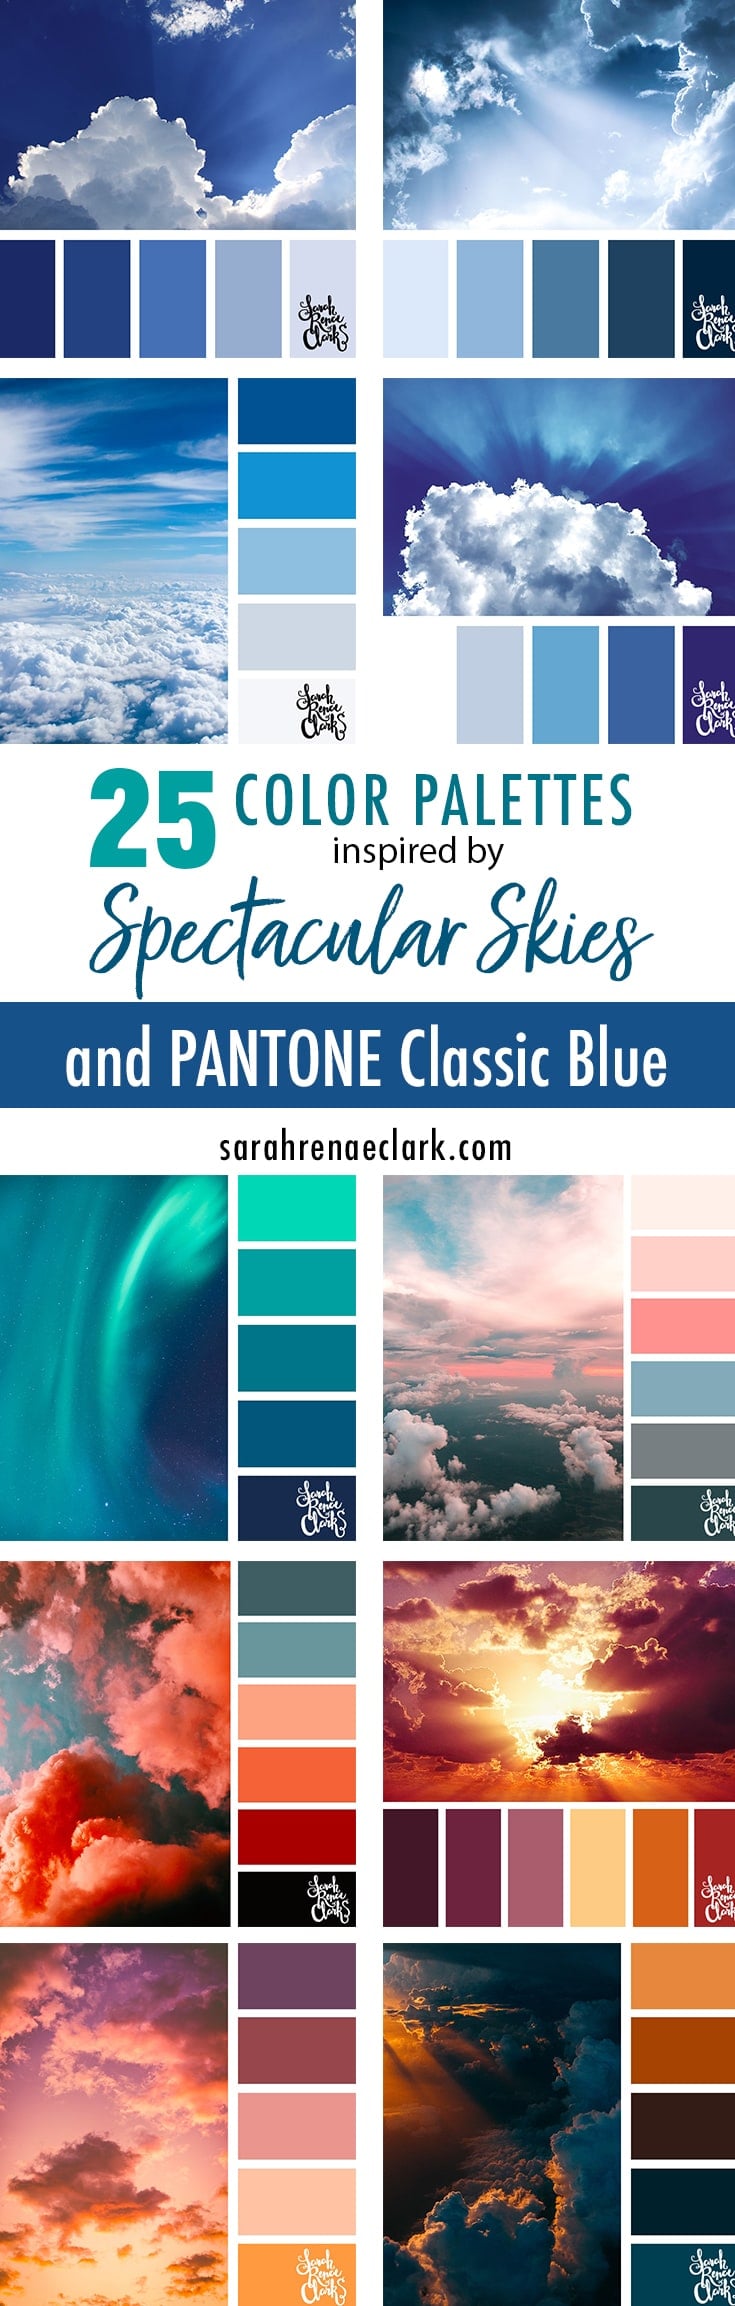 25 Color Palettes Inspired by Spectacular Skies